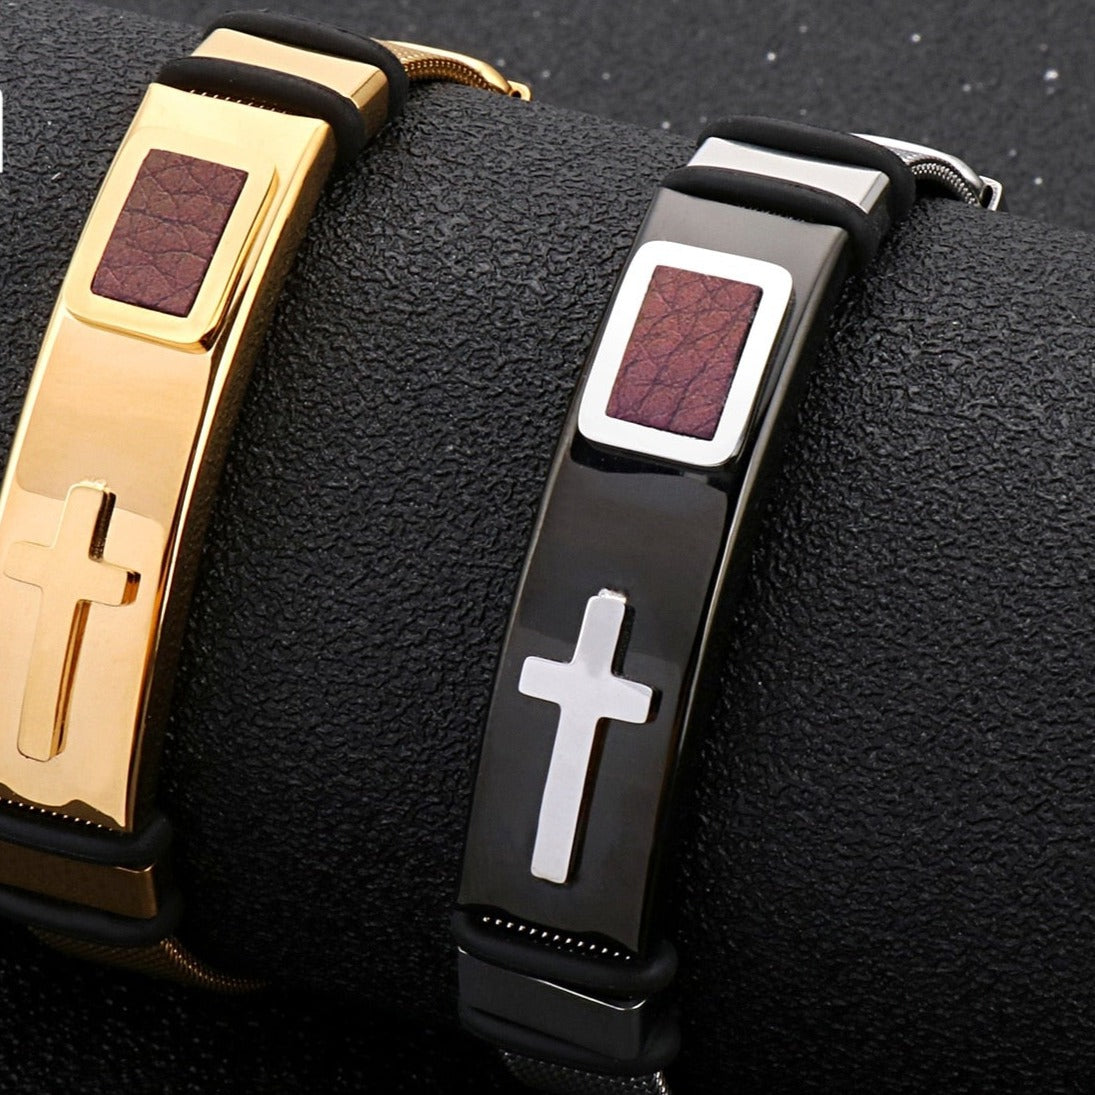 Cross and Leather Watch Band Bracelet